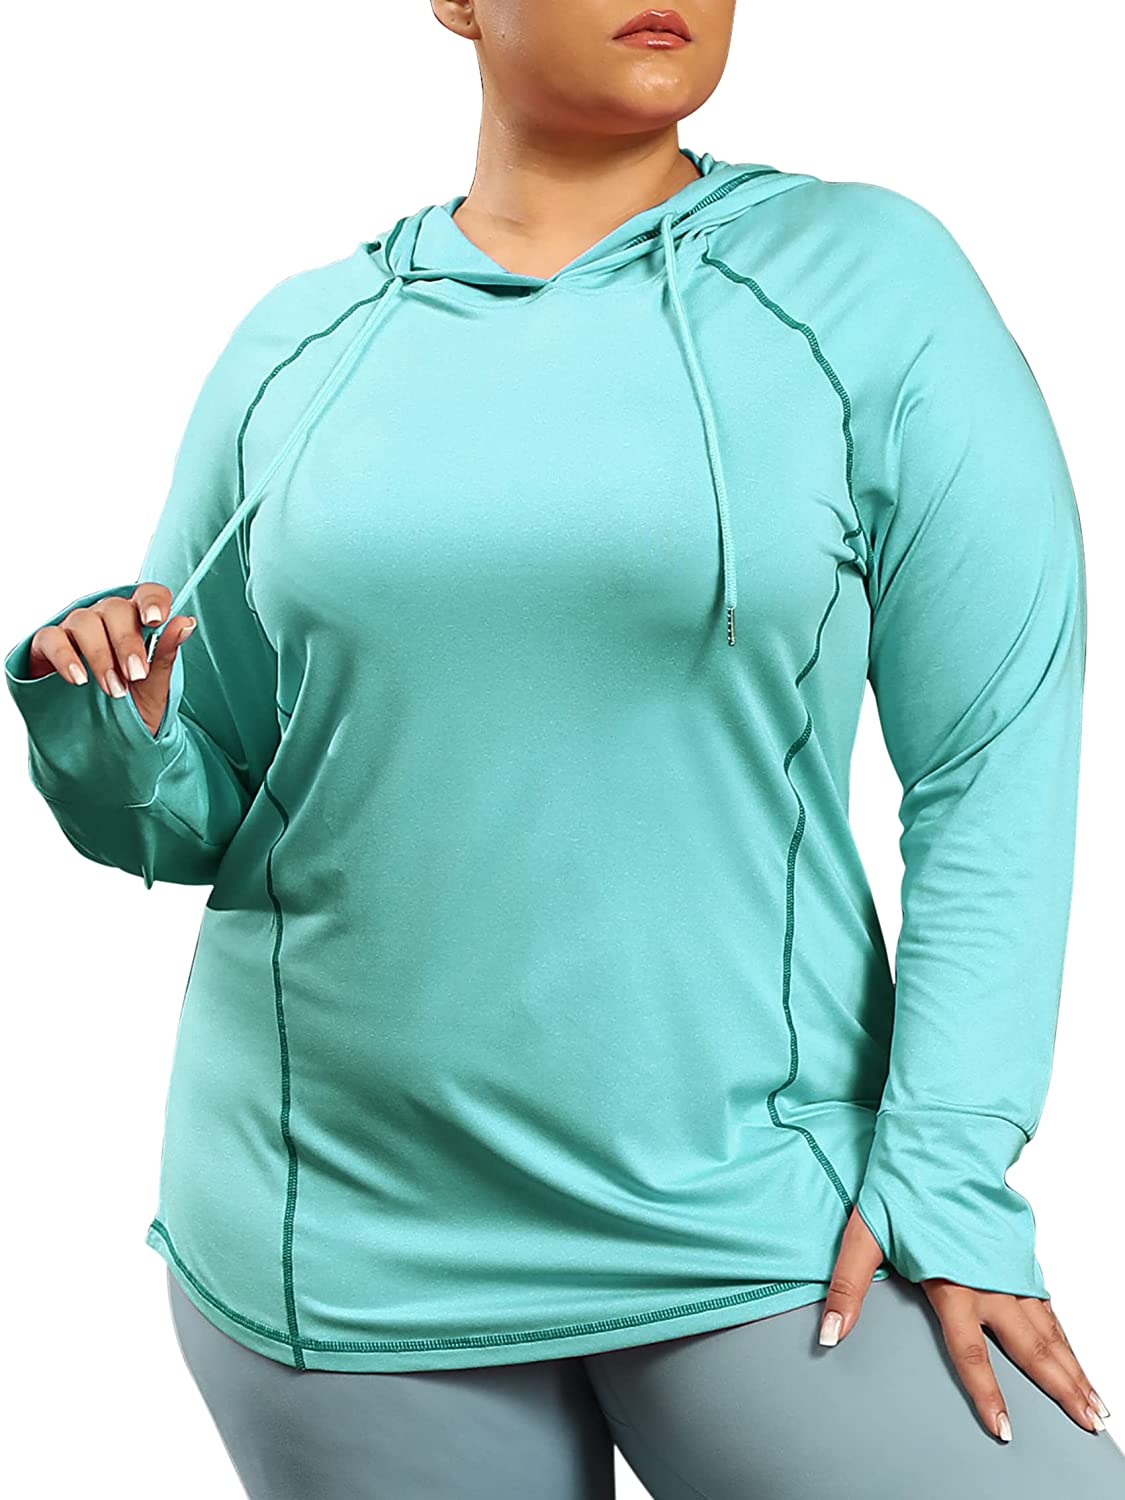 FOREYOND Plus Size Workout Tops for Women Long Sleeve Shirts